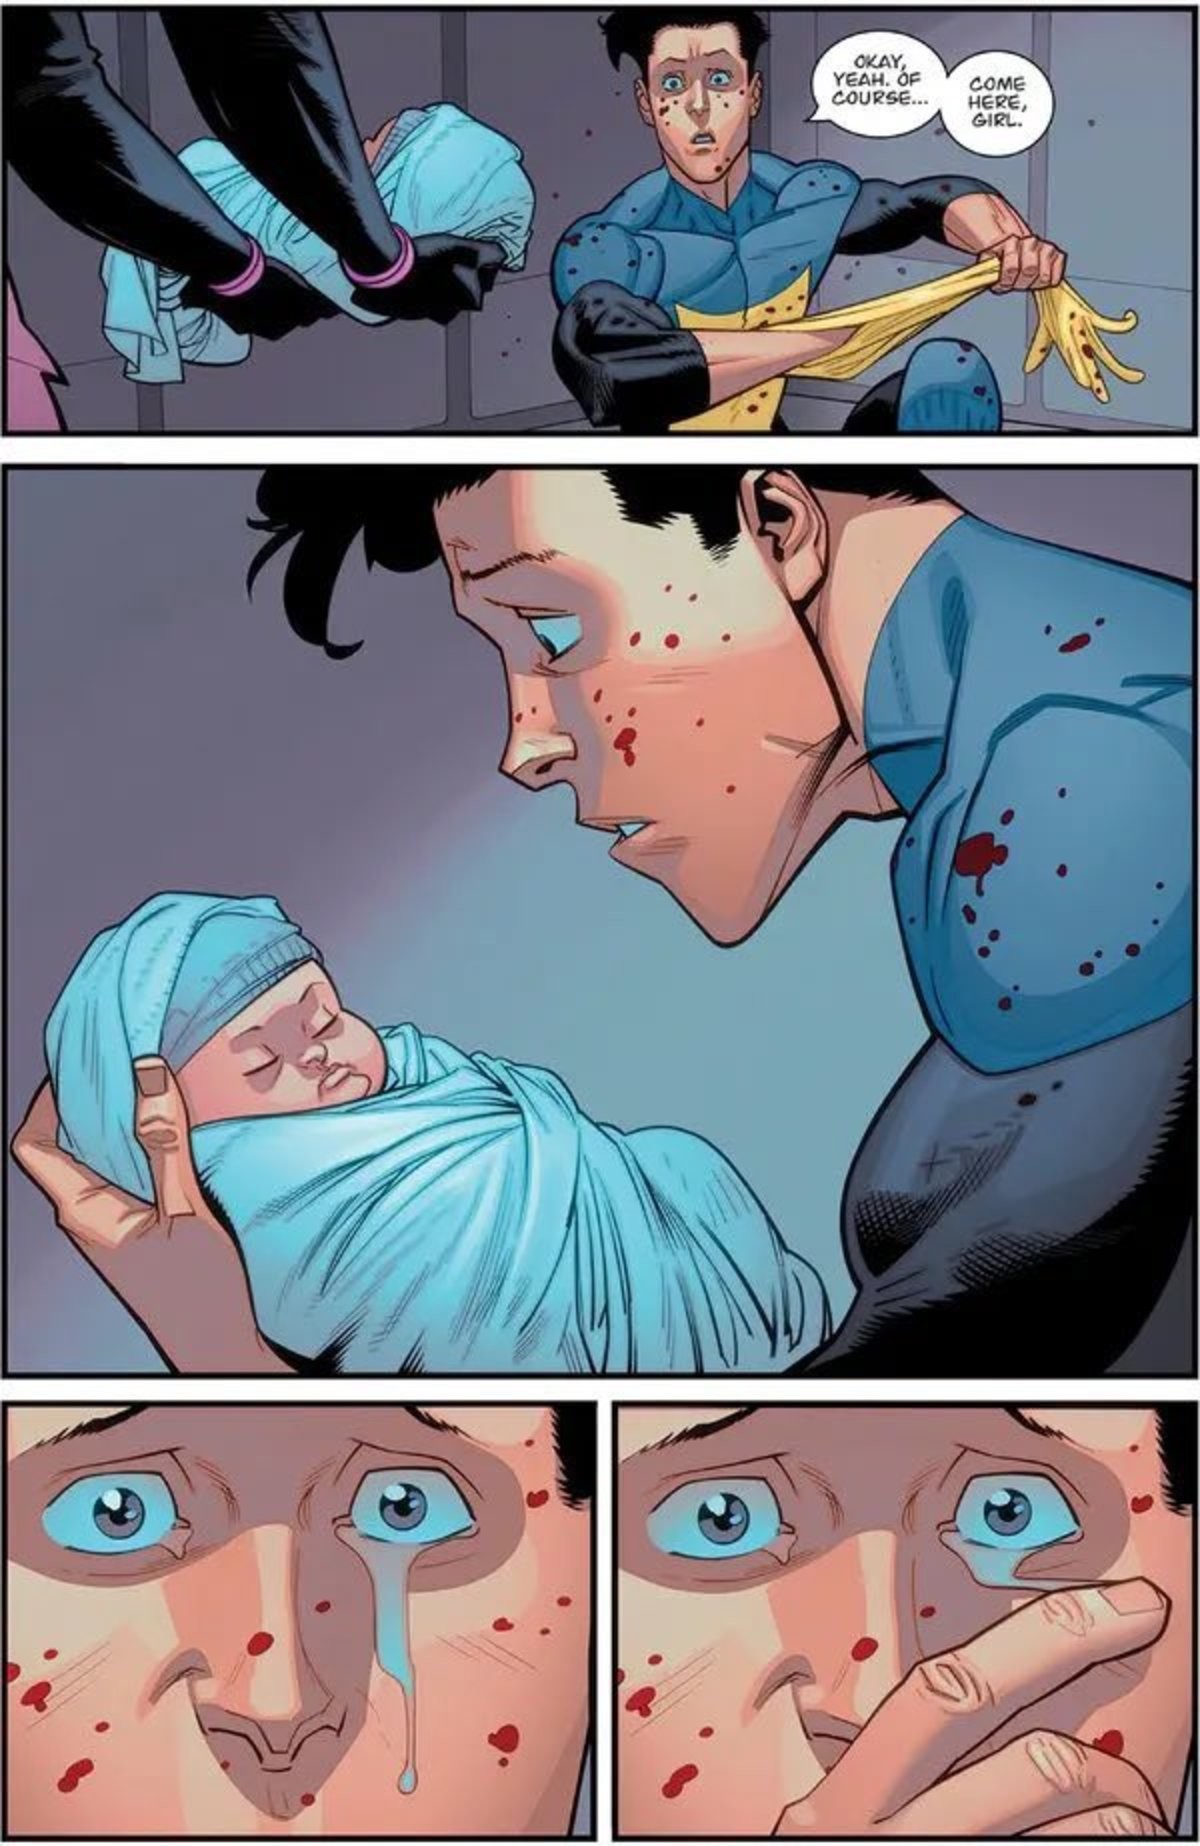 bABY. .. are these spoilers for invincible? if so thank god the baby is white cause that black chick was a massive cunt